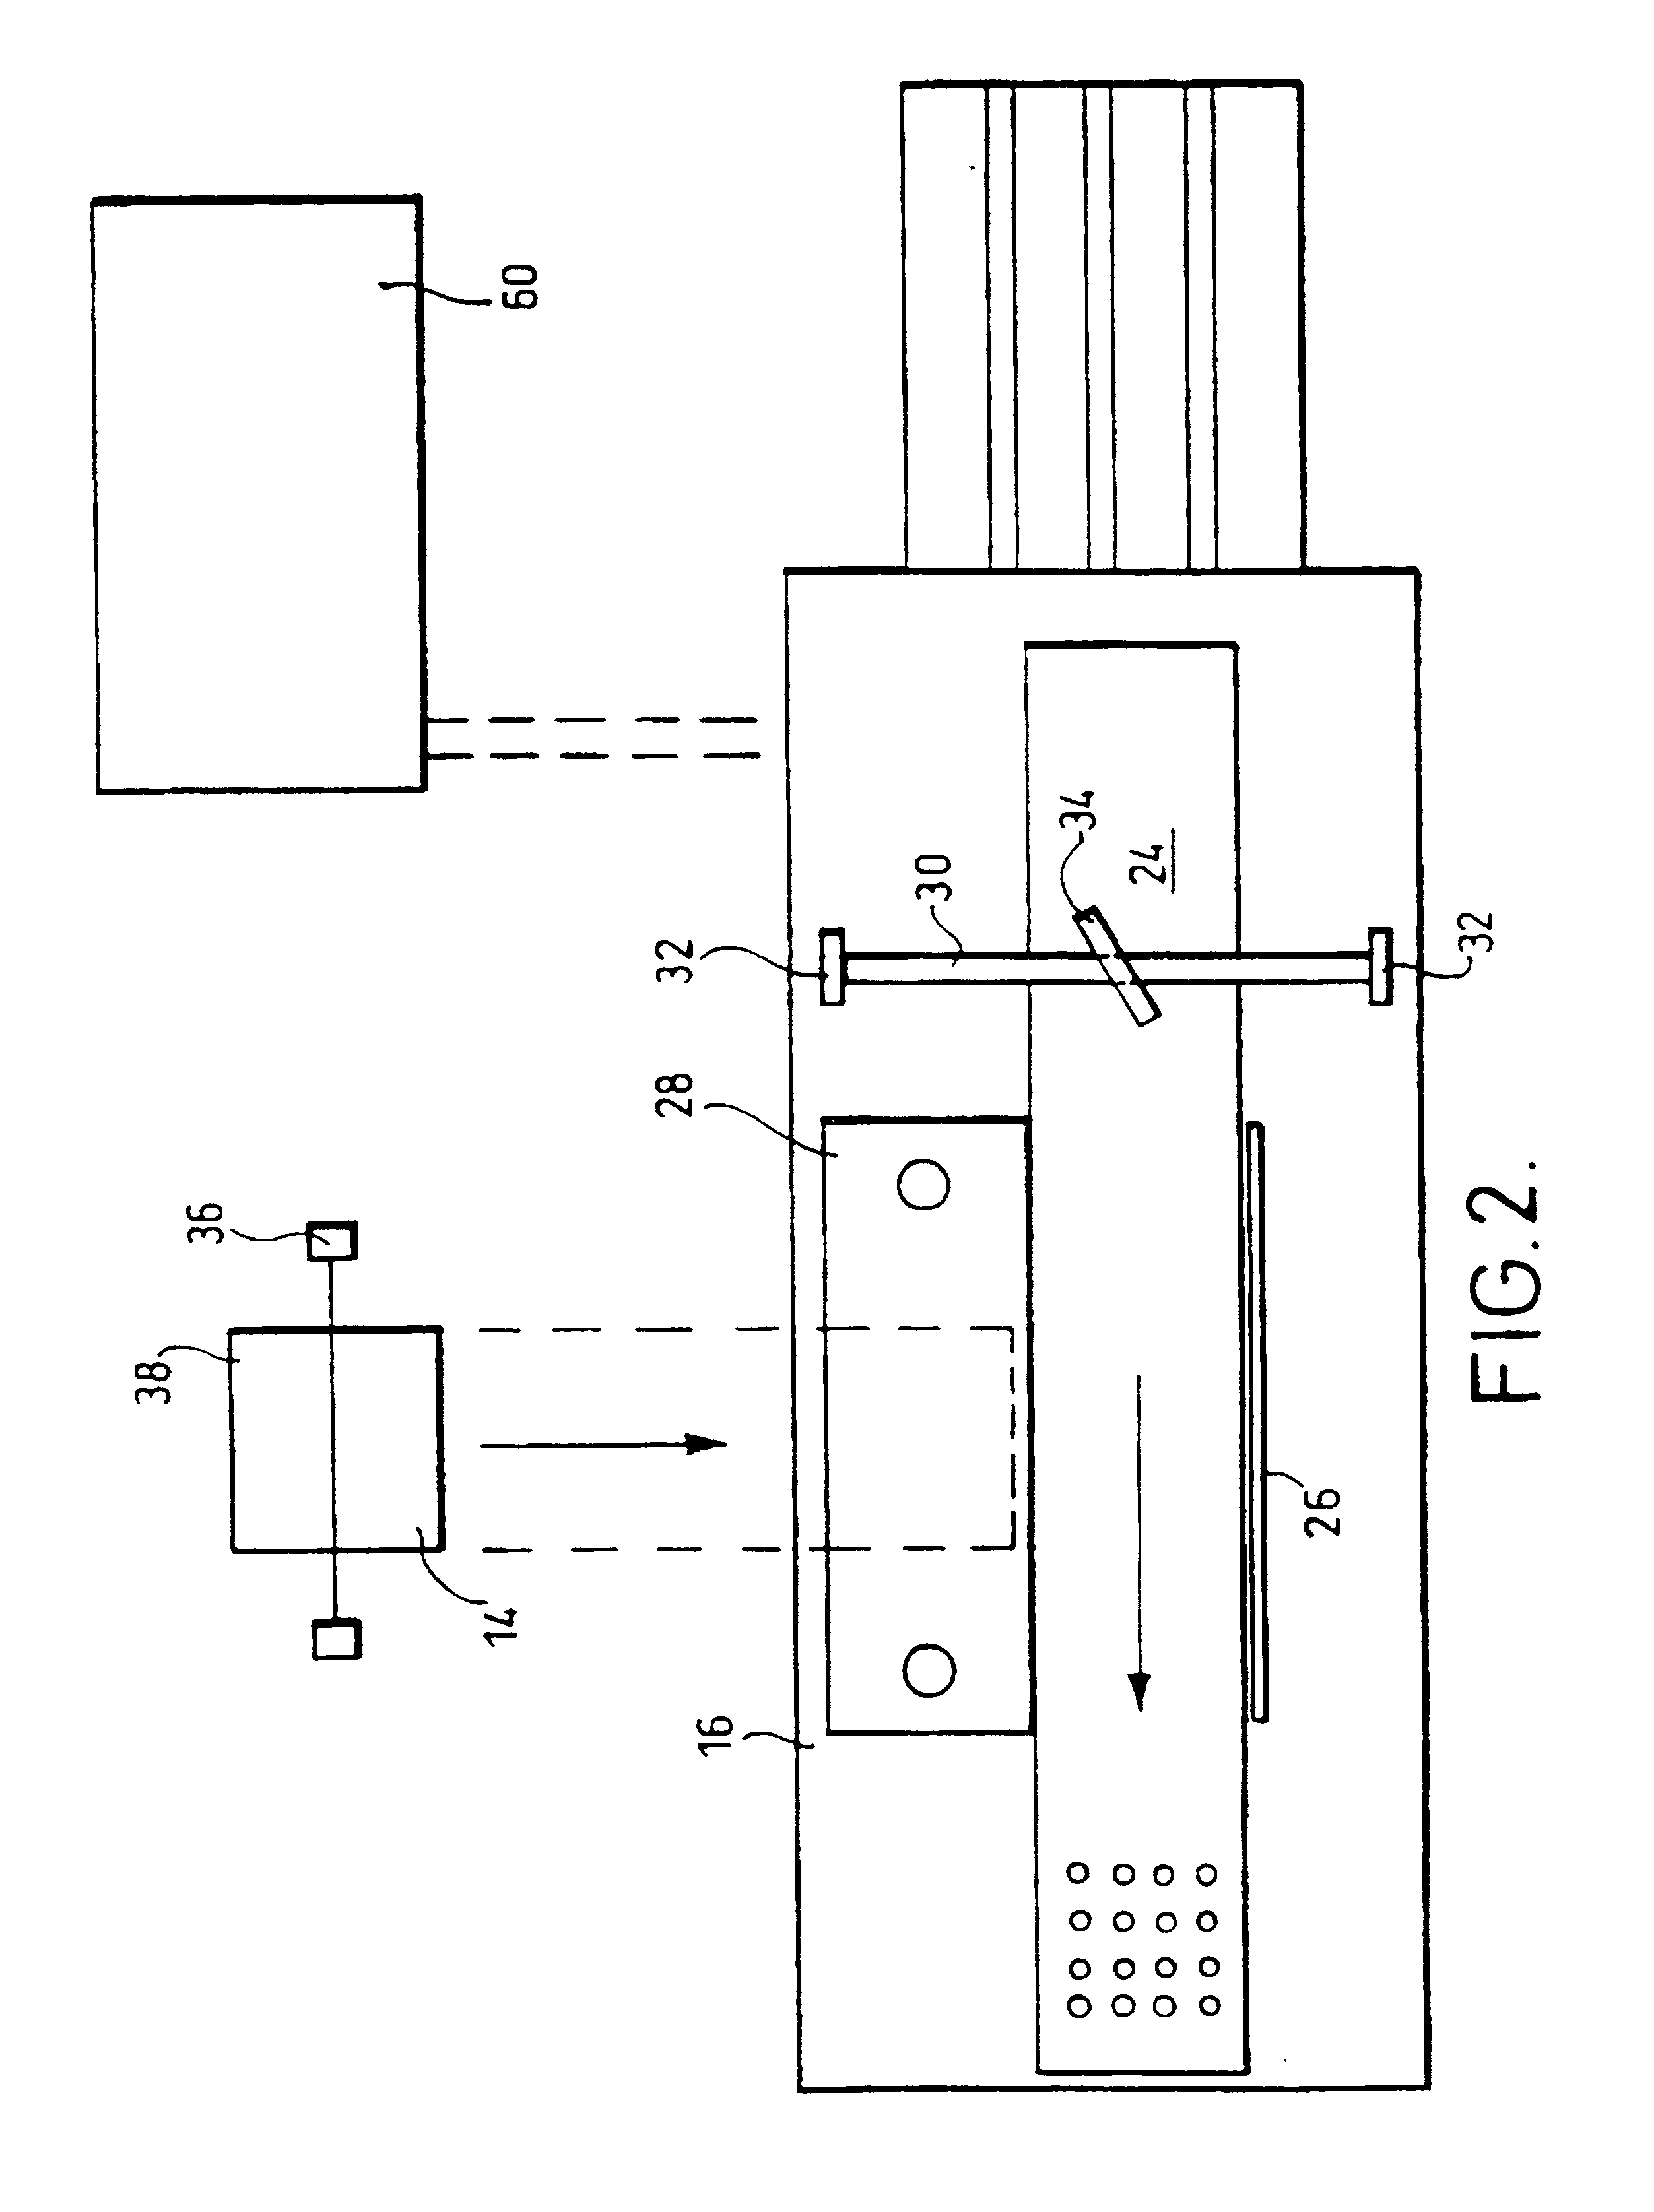 Apparatus for mounting a cutting strip